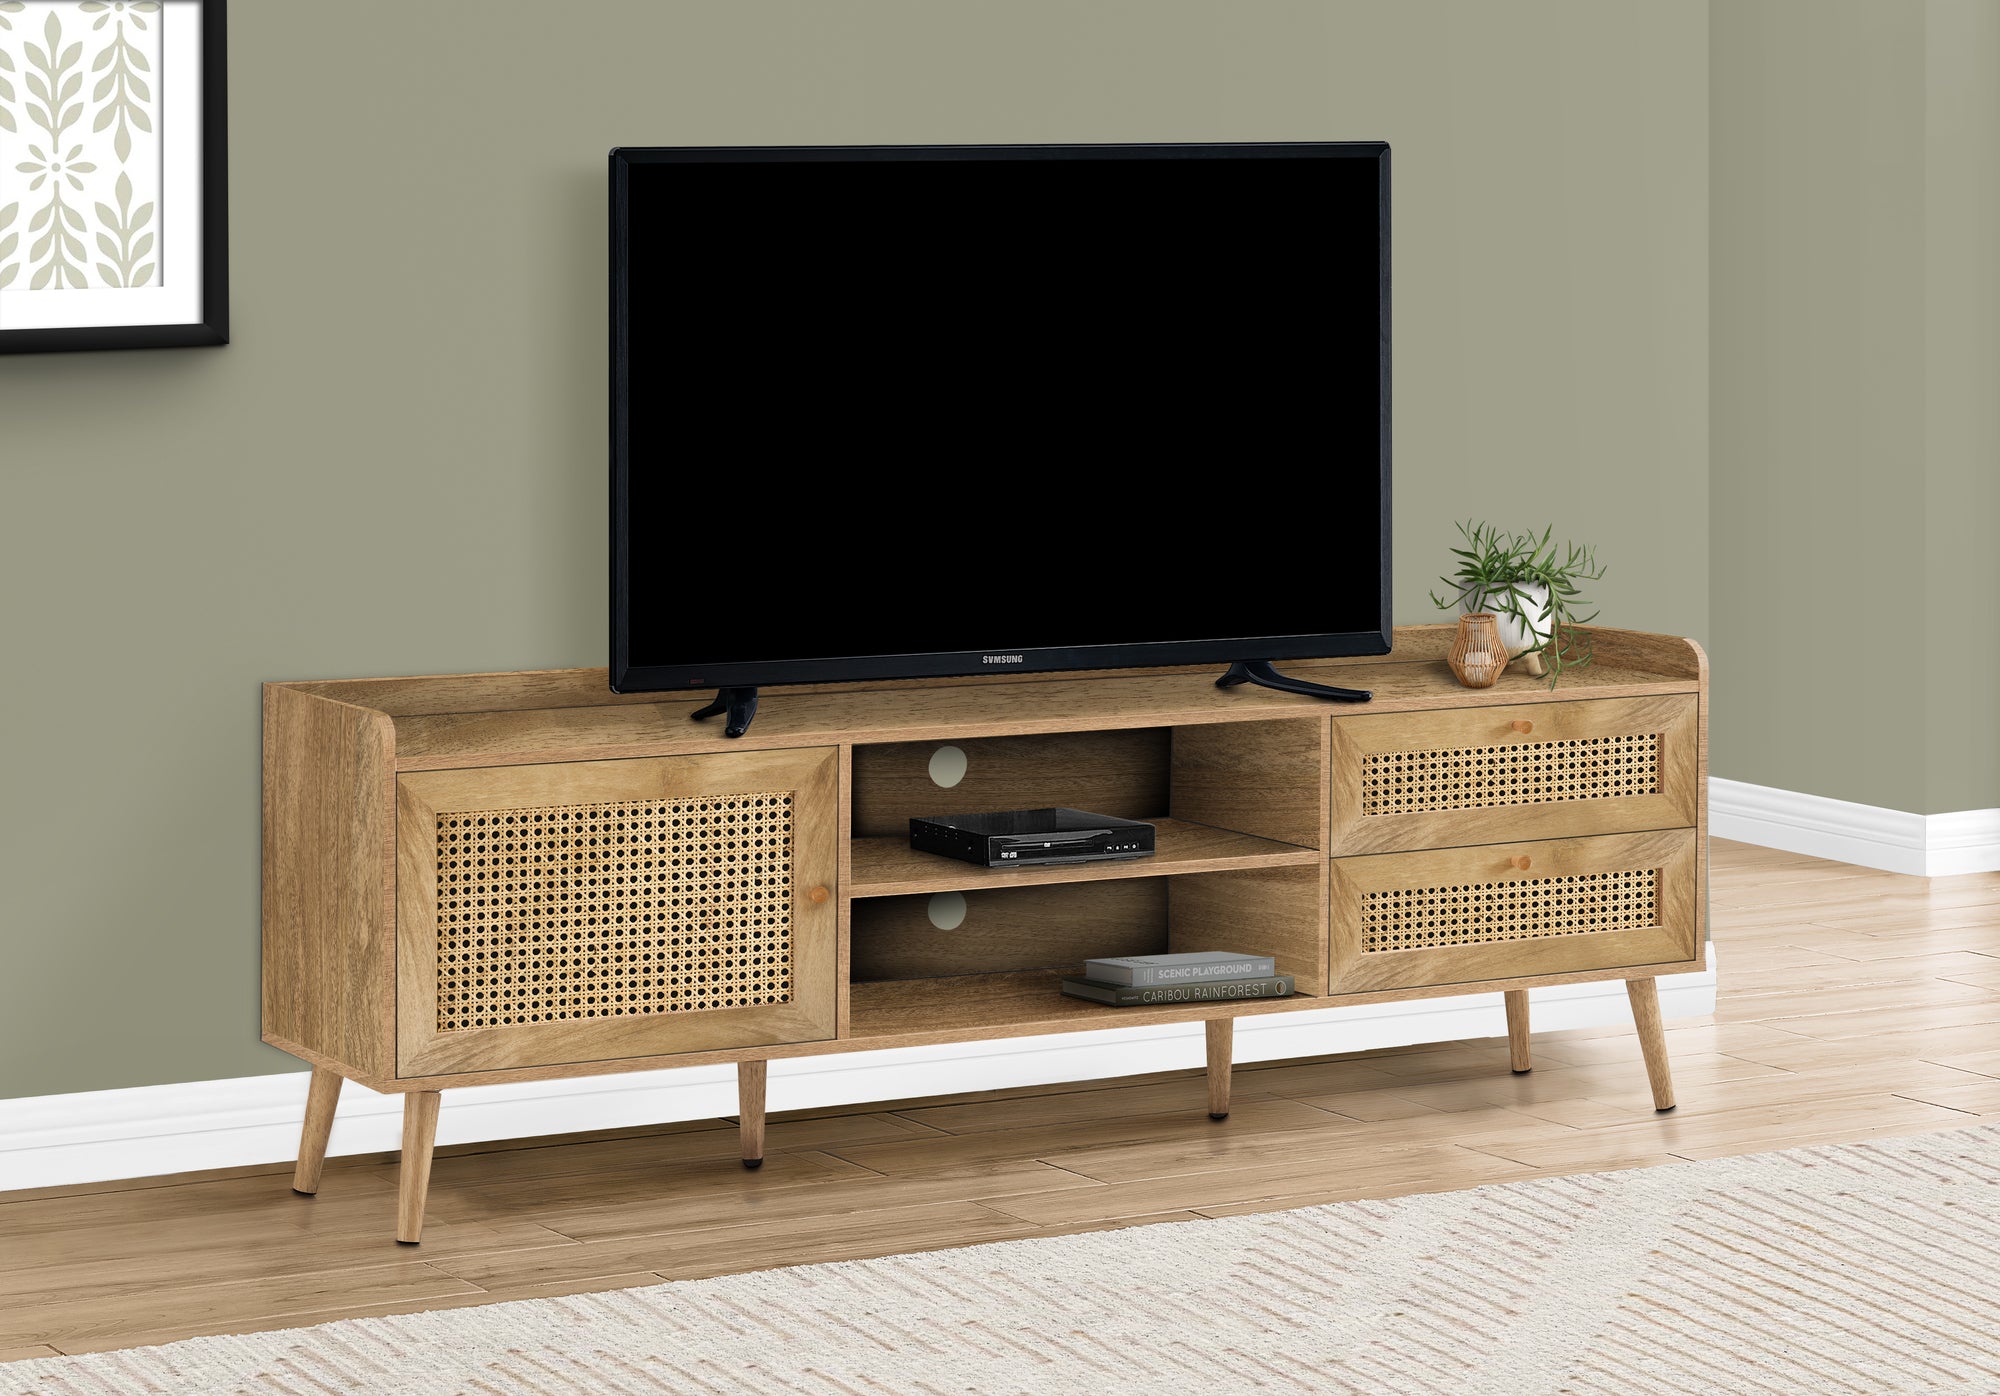 MN-612723    Tv Stand, 72 Inch, Console, Media Entertainment Center, Storage Cabinet, Living Room, Bedroom, Walnut Laminate, Wood Legs, Transitional